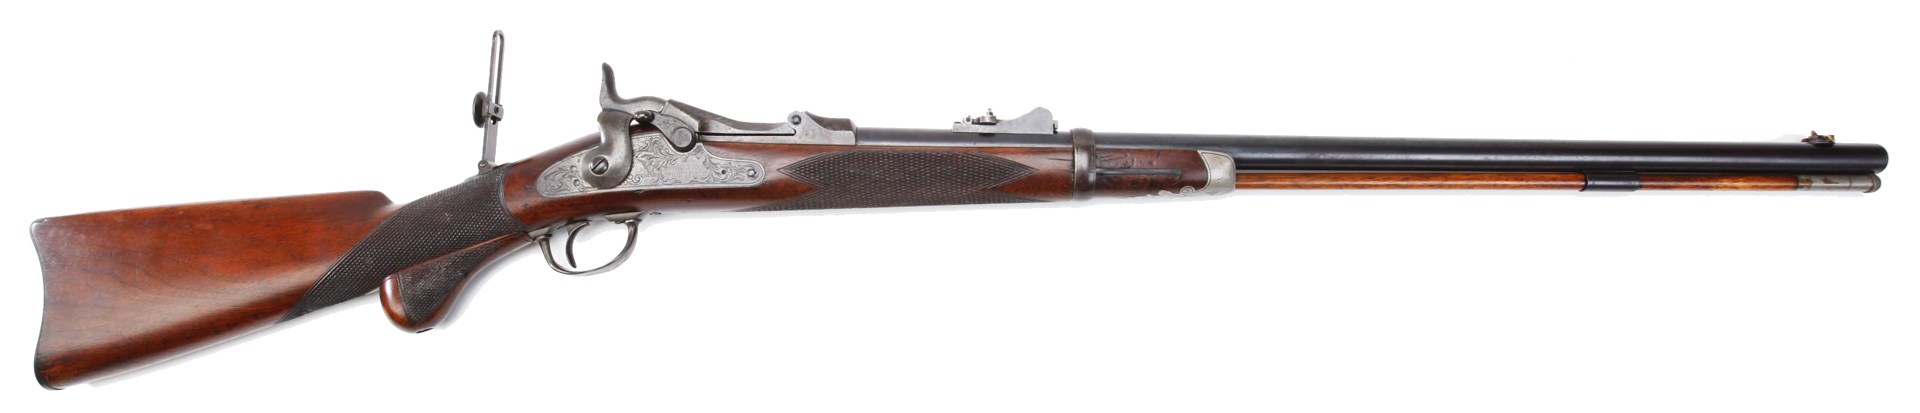 right side of officer model trapdoor rifle 1875 1885